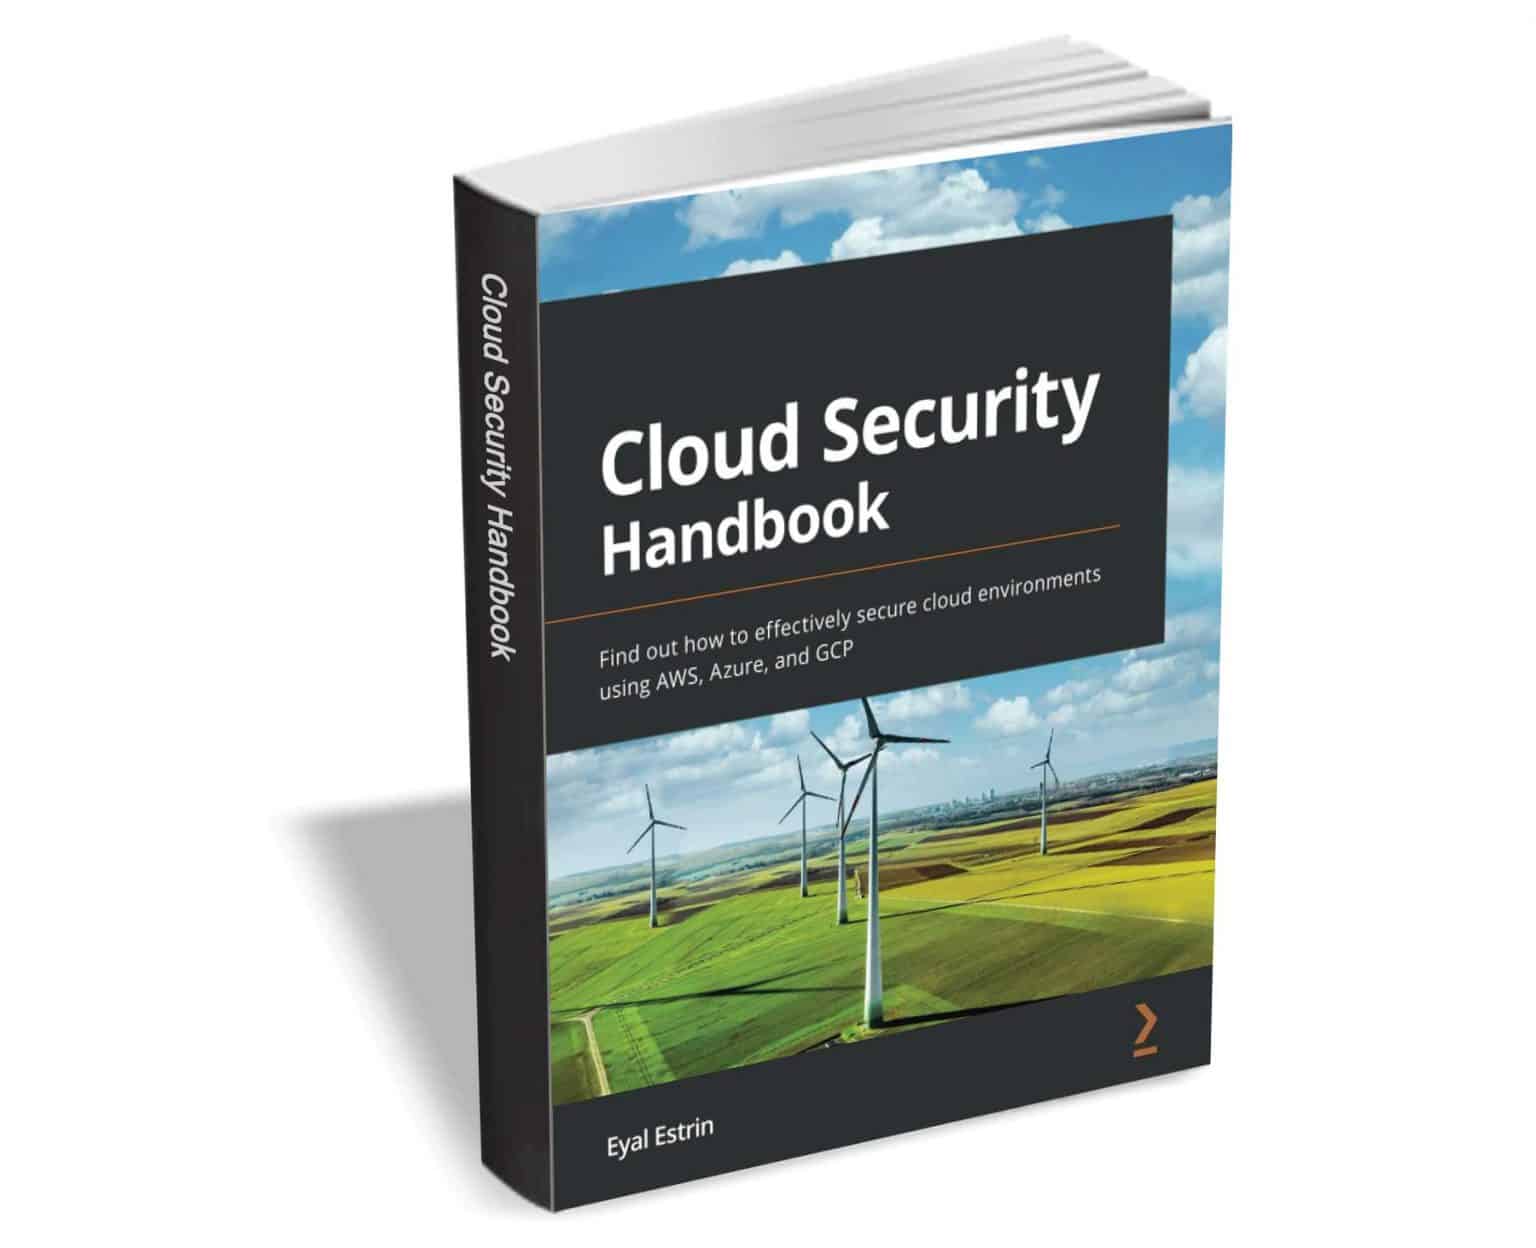 Get 'Cloud Security Handbook' (worth 41.99) for FREE